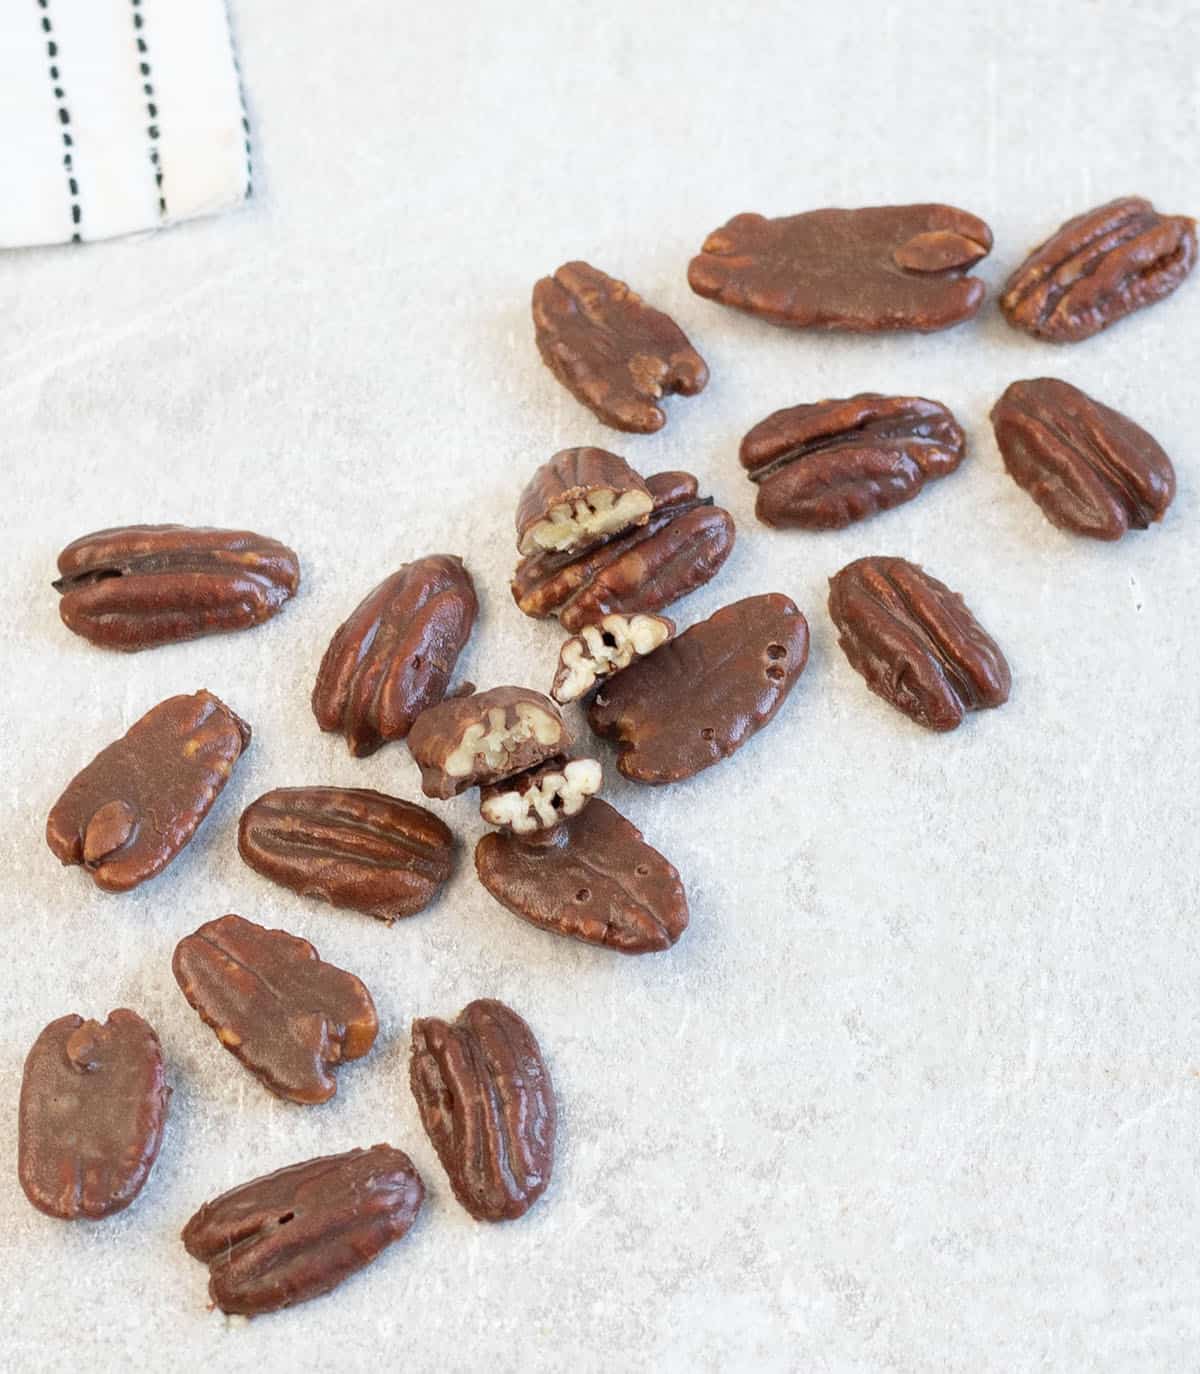 Chocolate Covered Pecans cut into halves and scattered on the table.